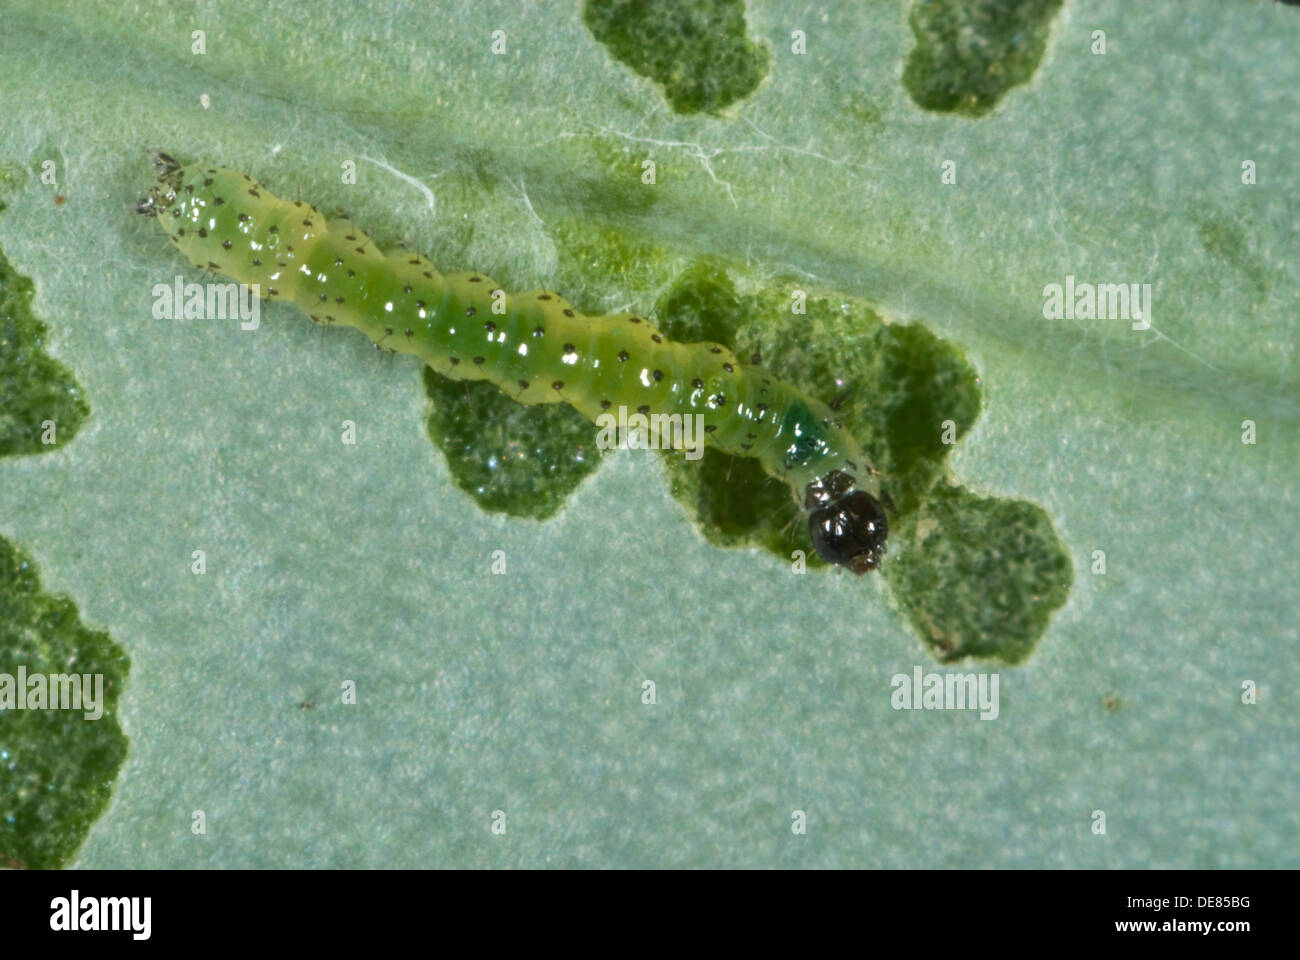 small white butterfly, Pieris rapae, neonate caterpillar feeding on a cabbage leaf Stock Photo